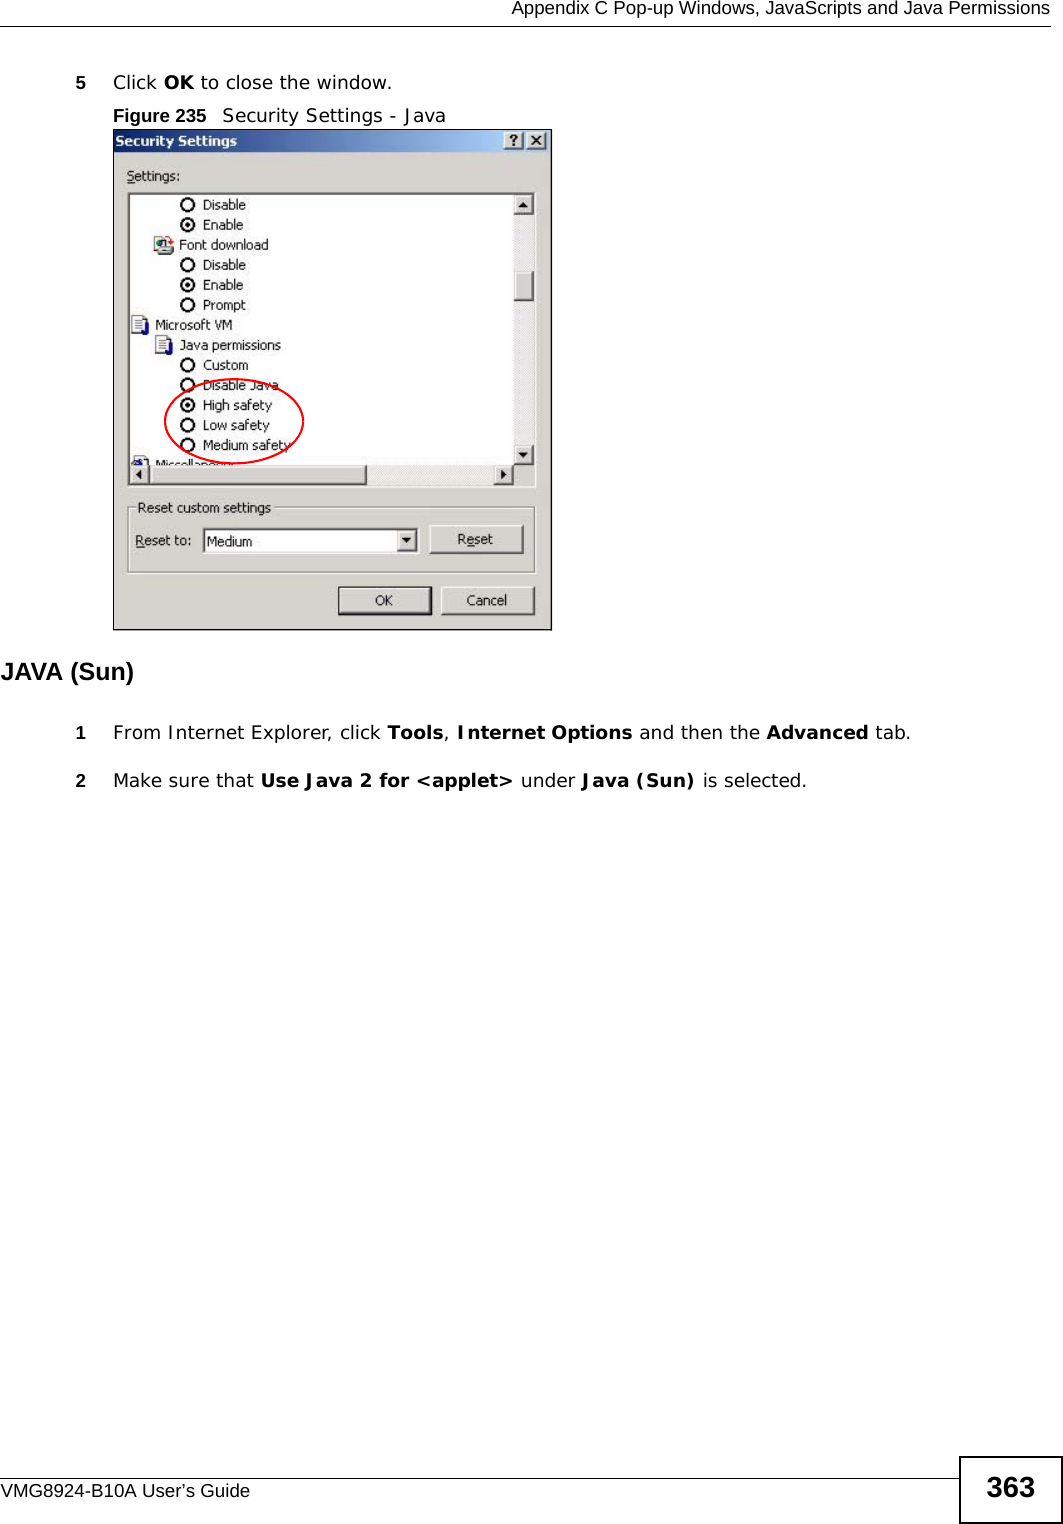  Appendix C Pop-up Windows, JavaScripts and Java PermissionsVMG8924-B10A User’s Guide 3635Click OK to close the window.Figure 235   Security Settings - Java JAVA (Sun)1From Internet Explorer, click Tools, Internet Options and then the Advanced tab. 2Make sure that Use Java 2 for &lt;applet&gt; under Java (Sun) is selected.